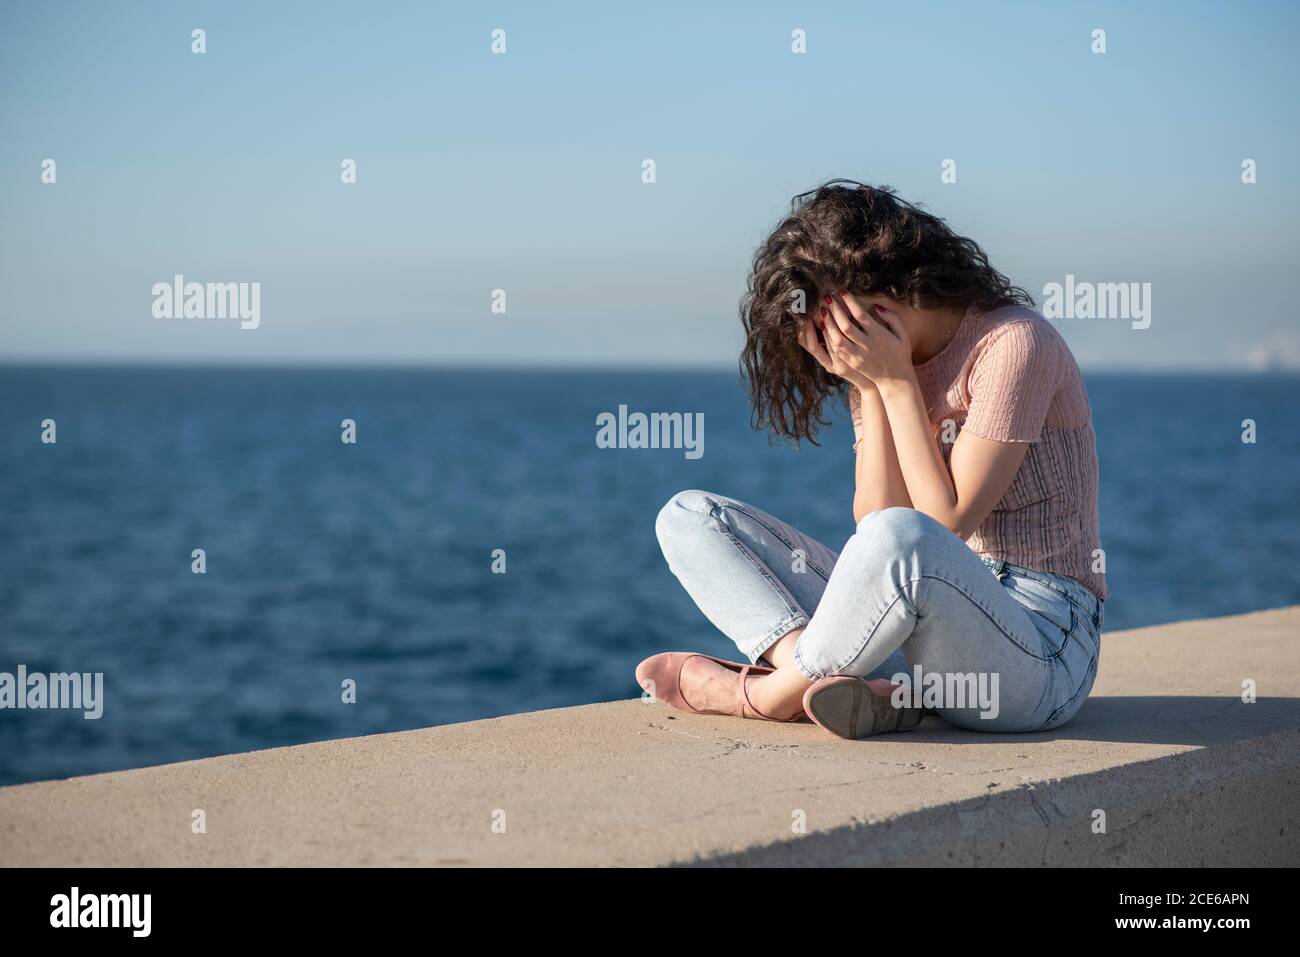 Stressed woman head in hands crying by the sea Stock Photo